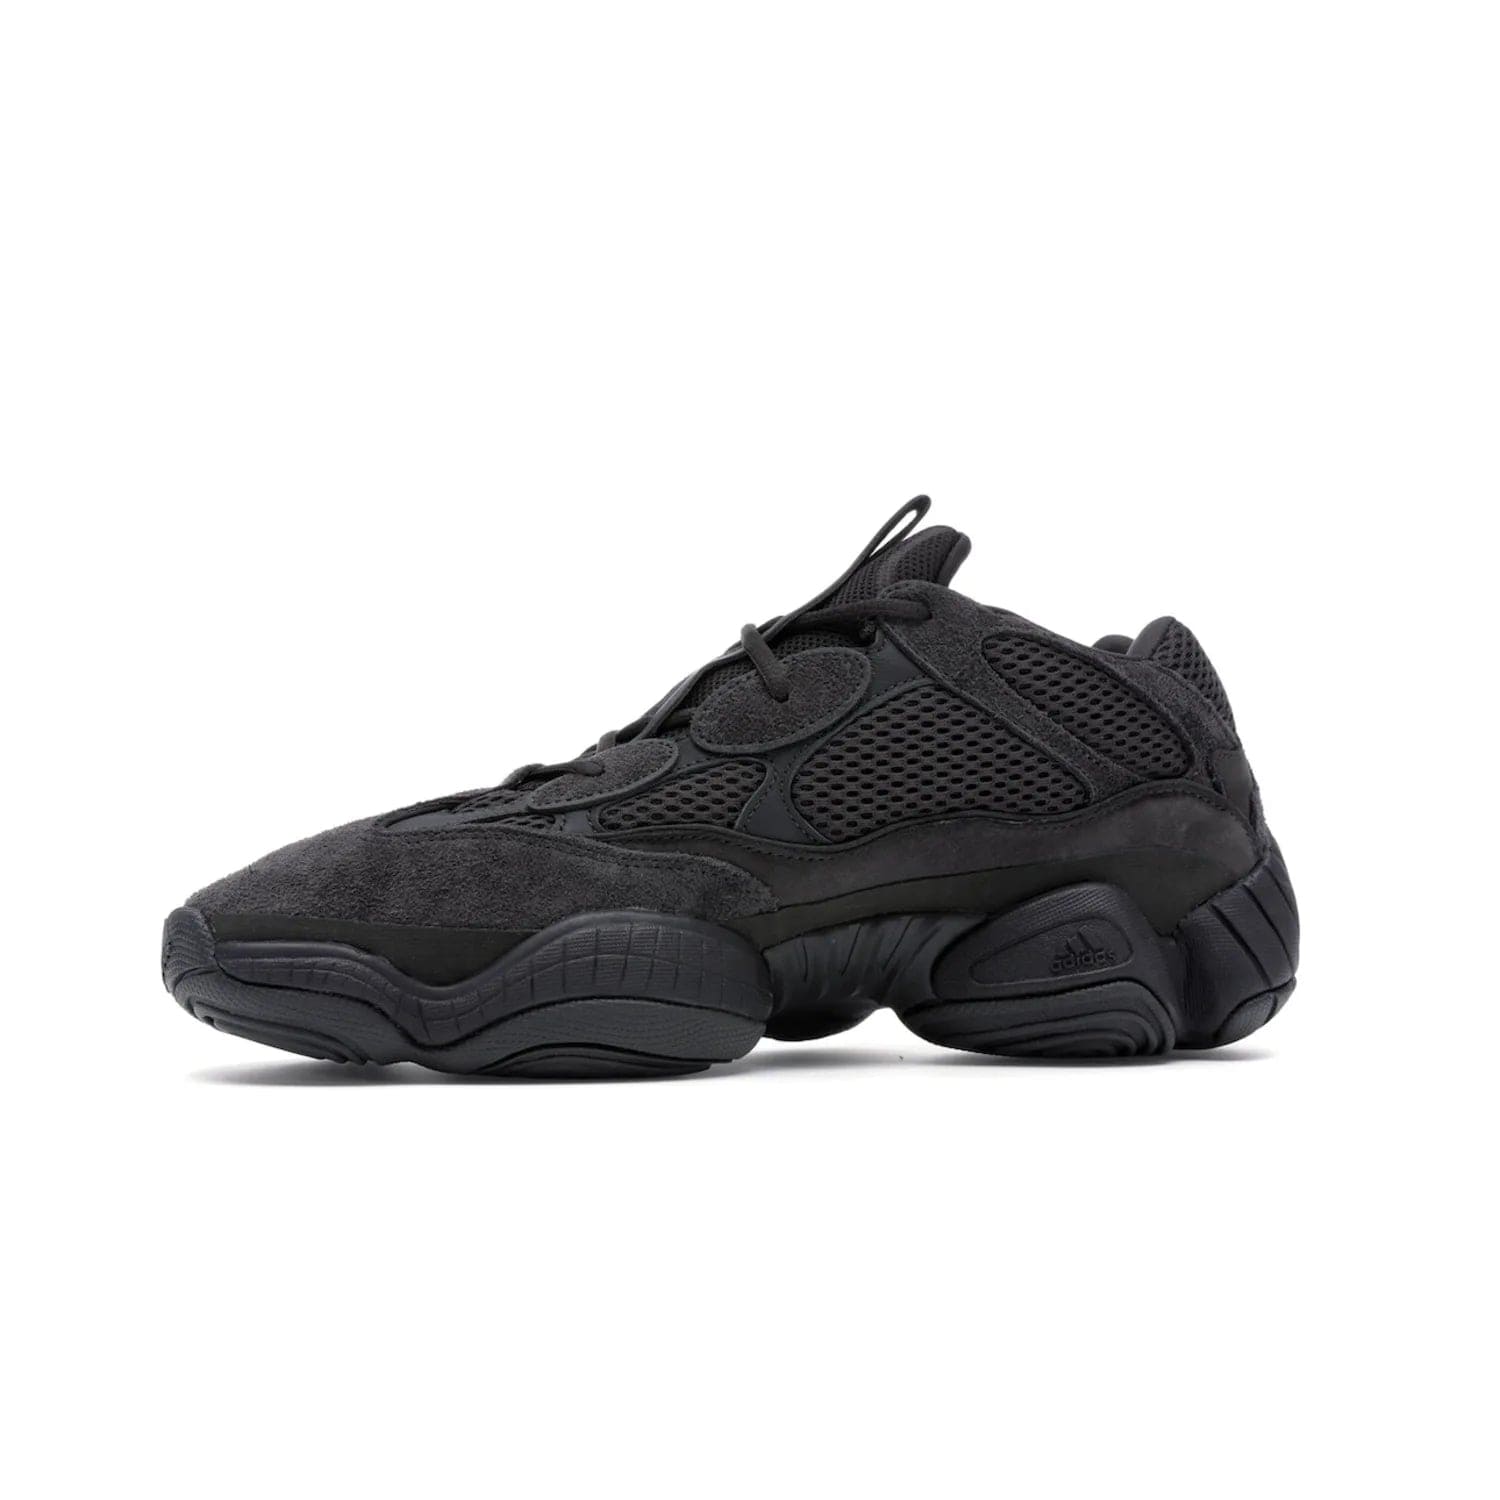 adidas Yeezy 500 Utility Black - Image 18 - Only at www.BallersClubKickz.com - Iconic adidas Yeezy 500 Utility Black in All-Black colorway. Durable black mesh and suede upper with adiPRENE® sole delivers comfort and support. Be unstoppable with the Yeezy 500 Utility Black. Released July 2018.